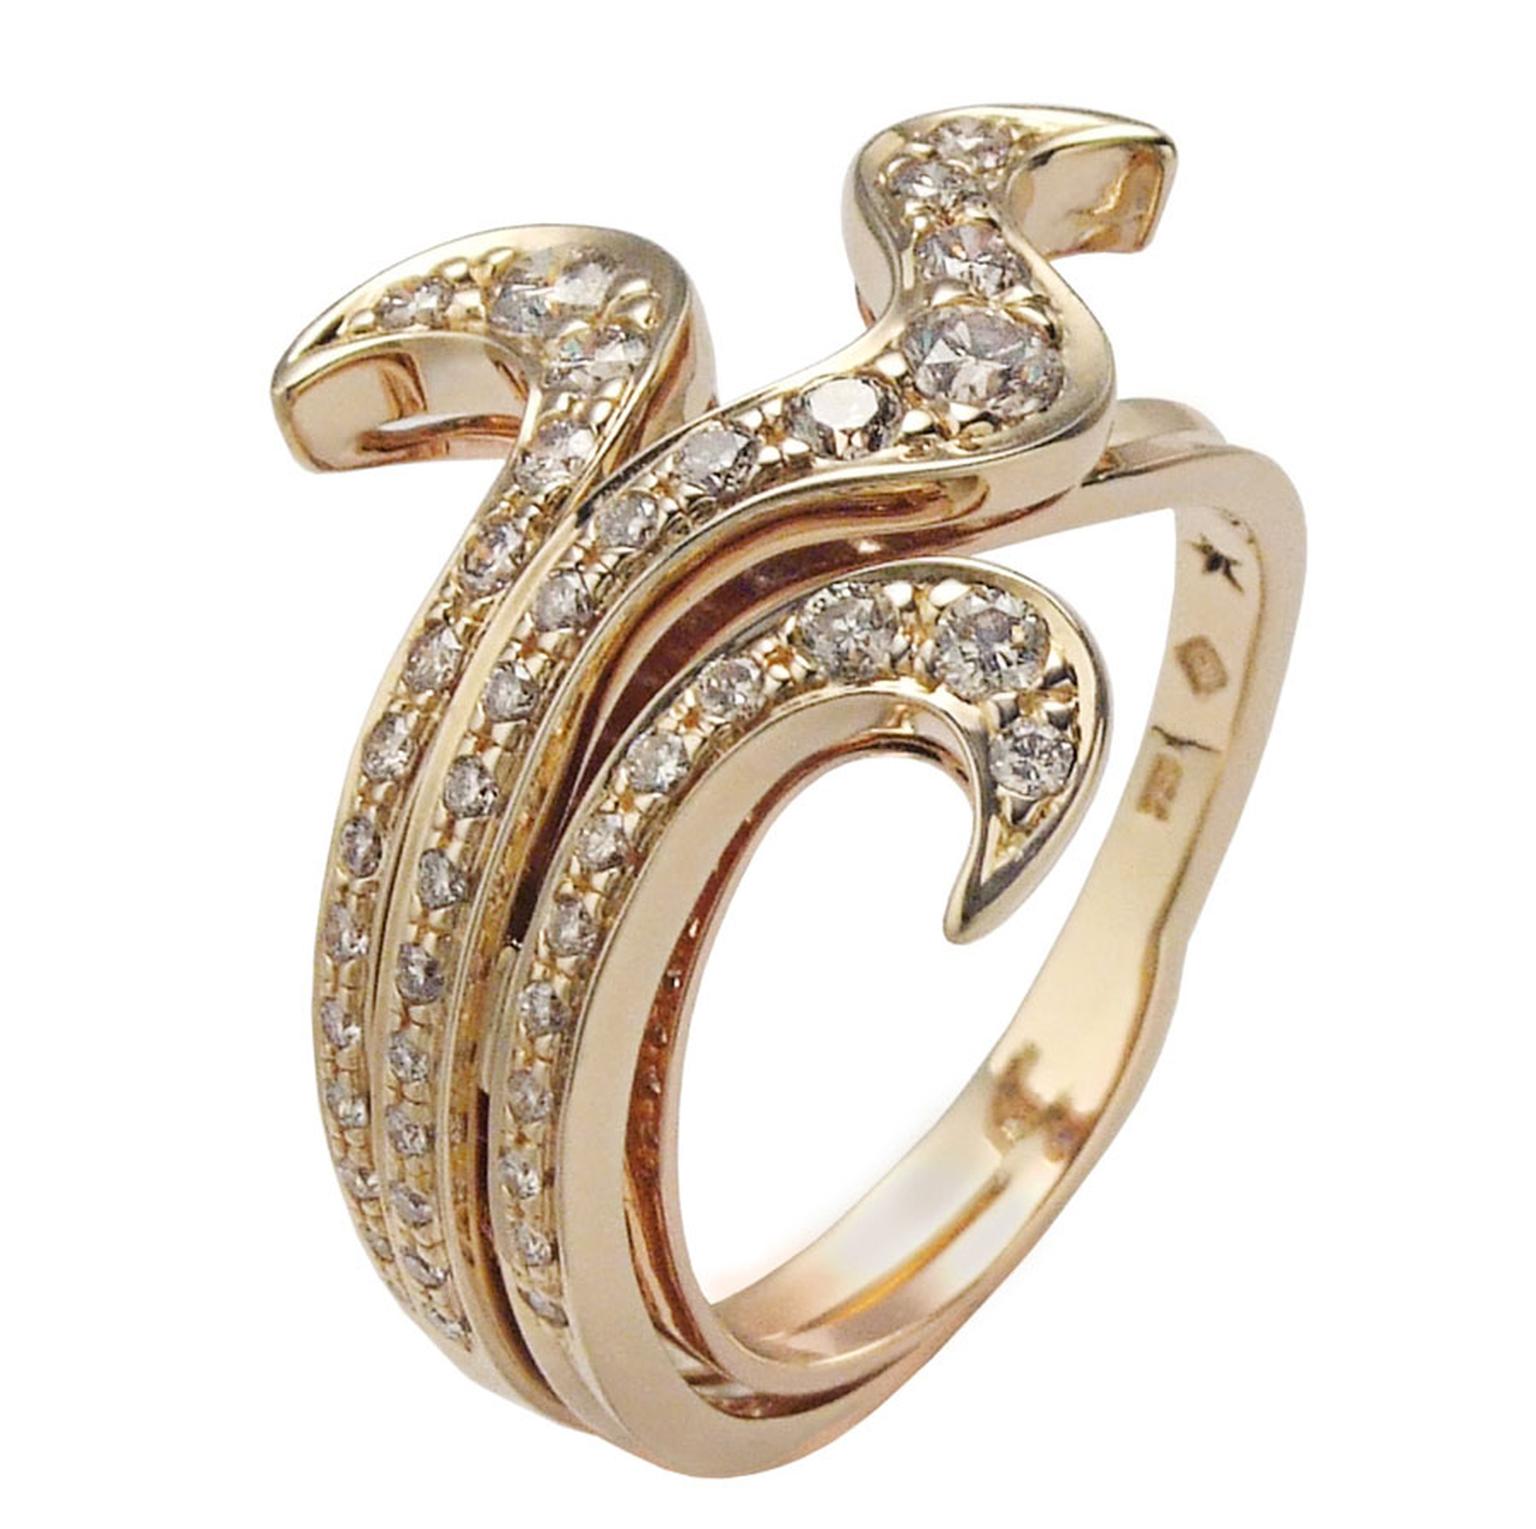 H-Stern-Ring-in-yellow-and-rose-gold-with-diamonds-2